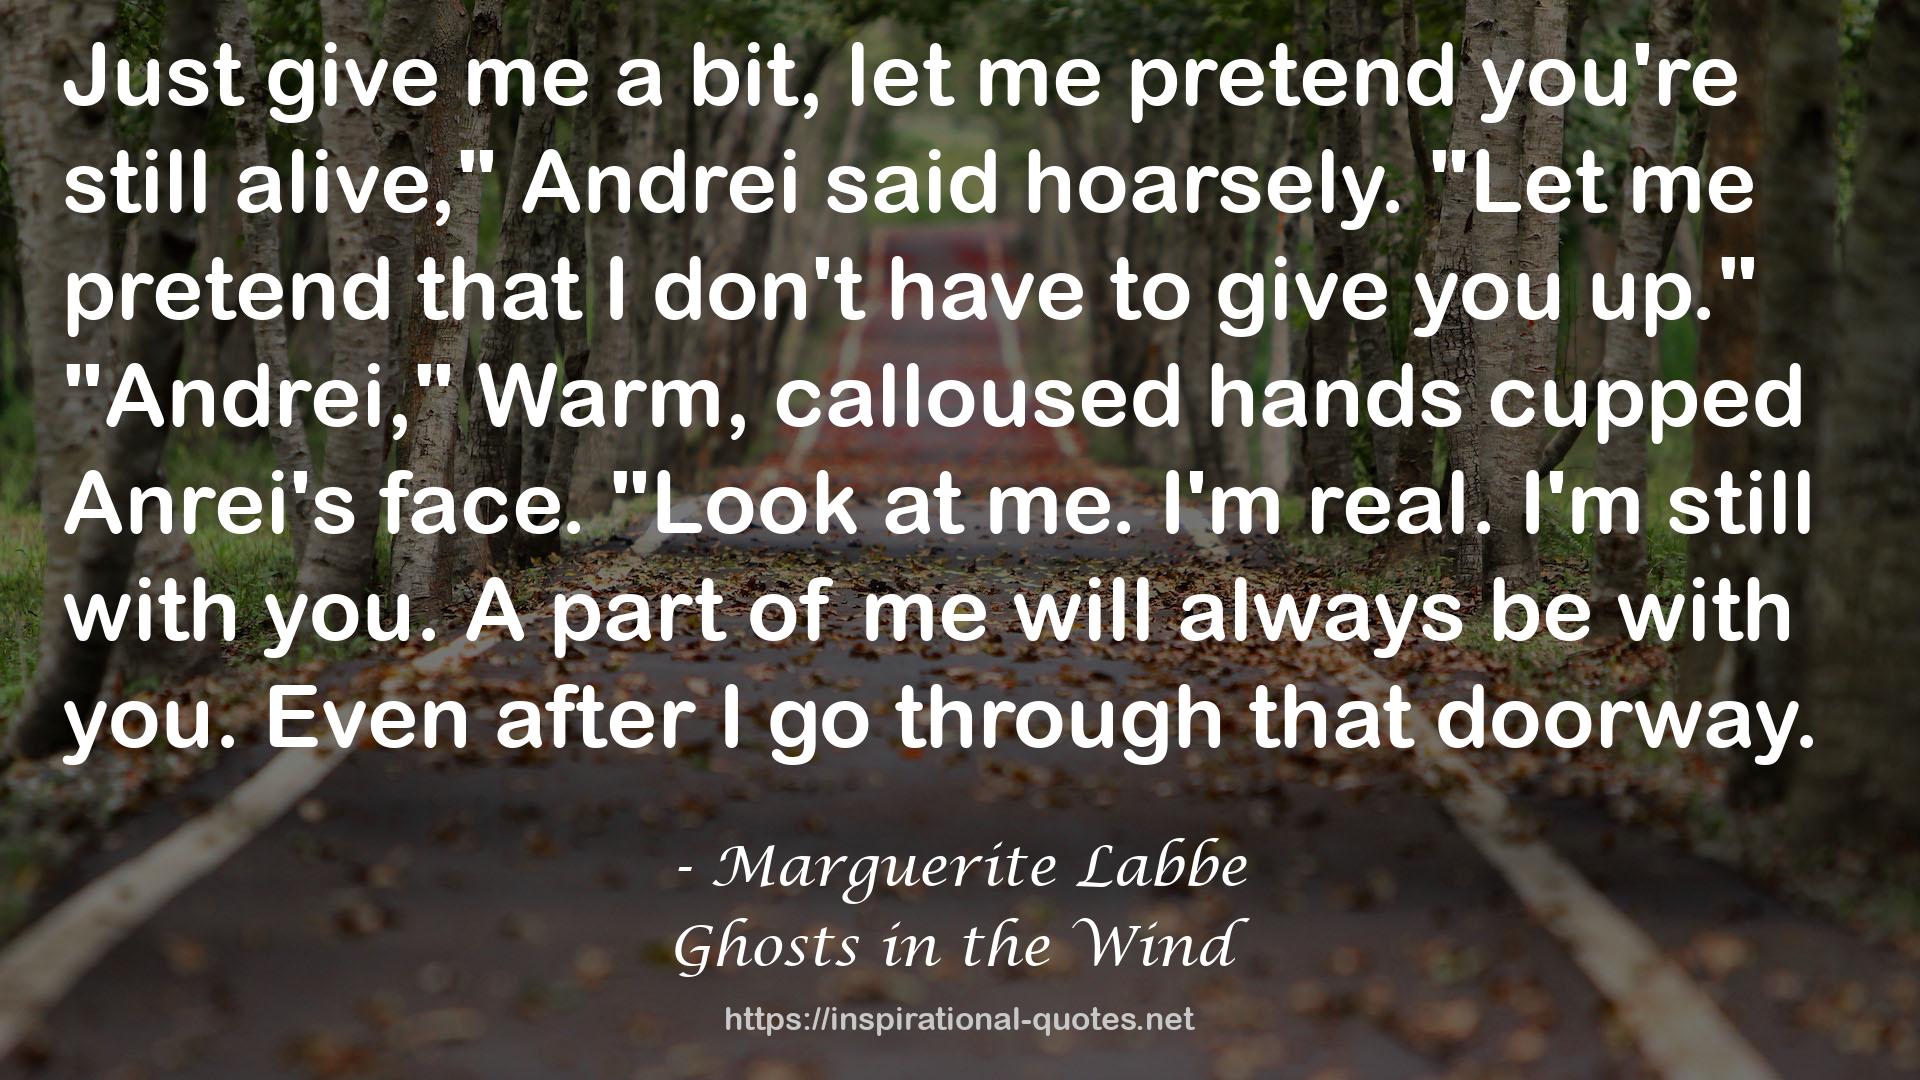 Ghosts in the Wind QUOTES